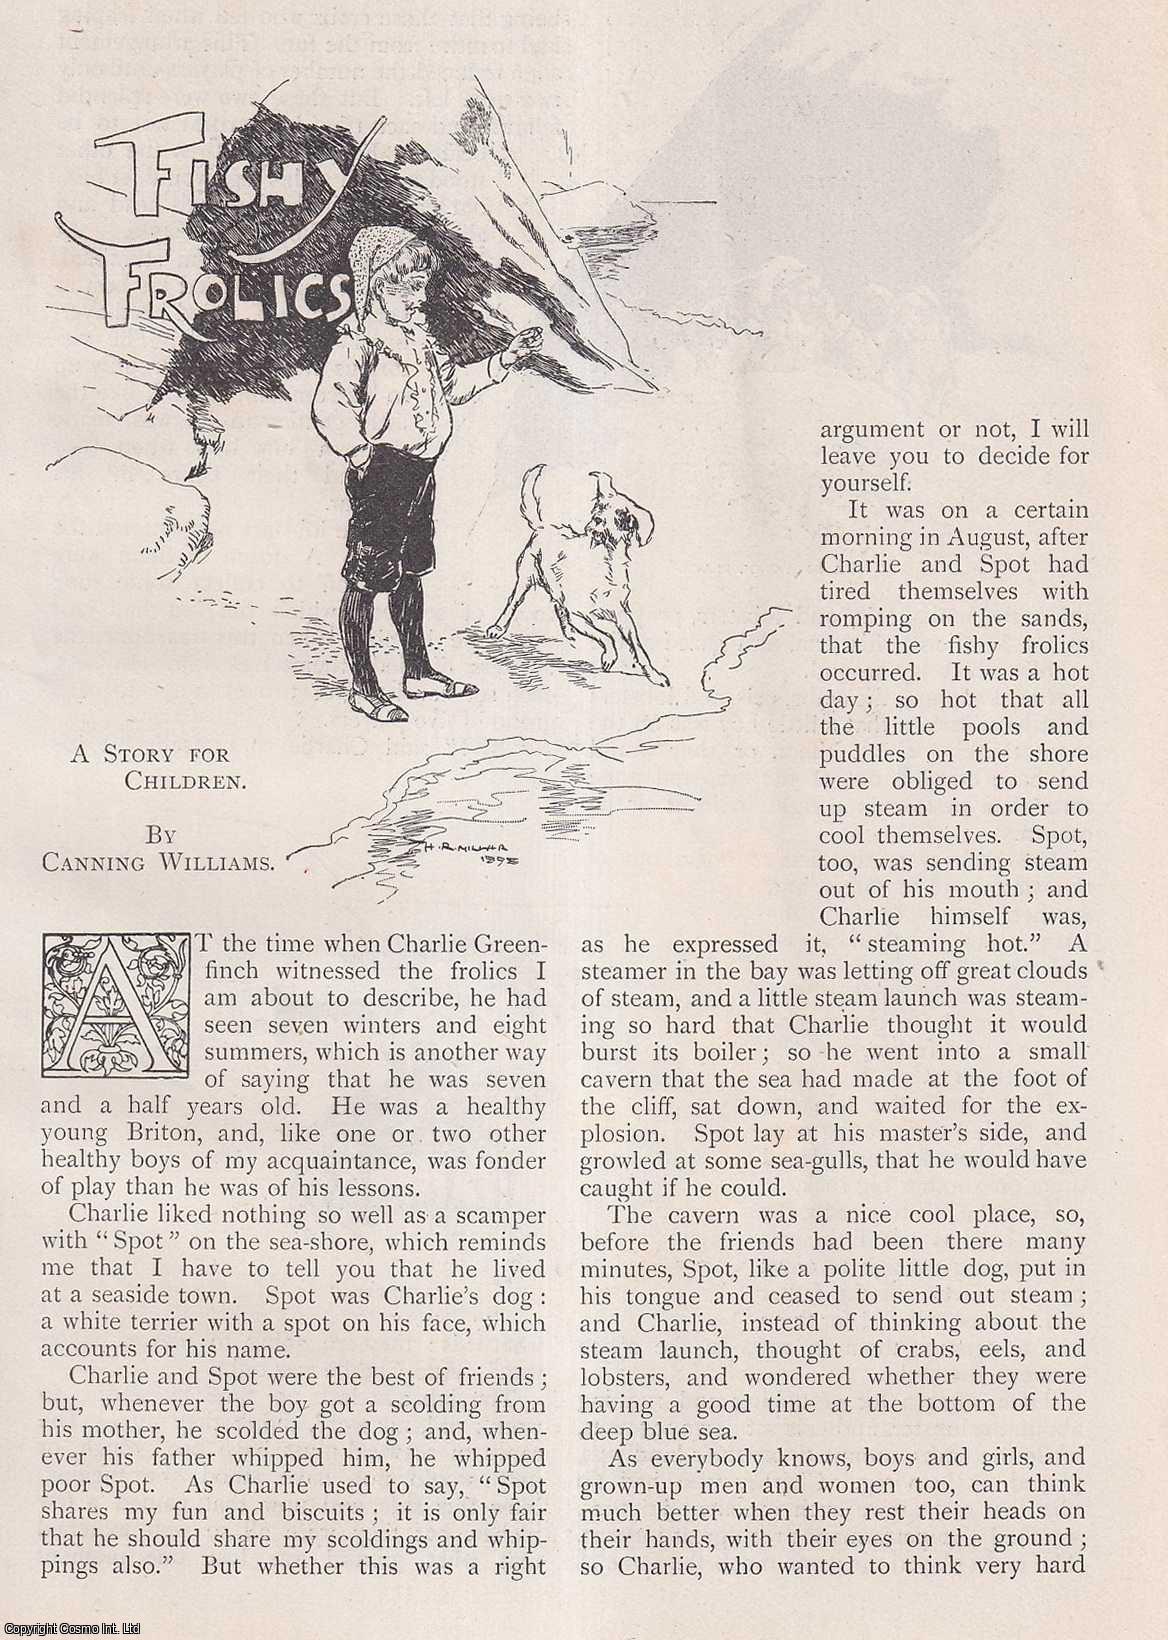 Canning Williams - Fishy Frolics. A Story for Children. An uncommon original article from The Strand Magazine, 1898.